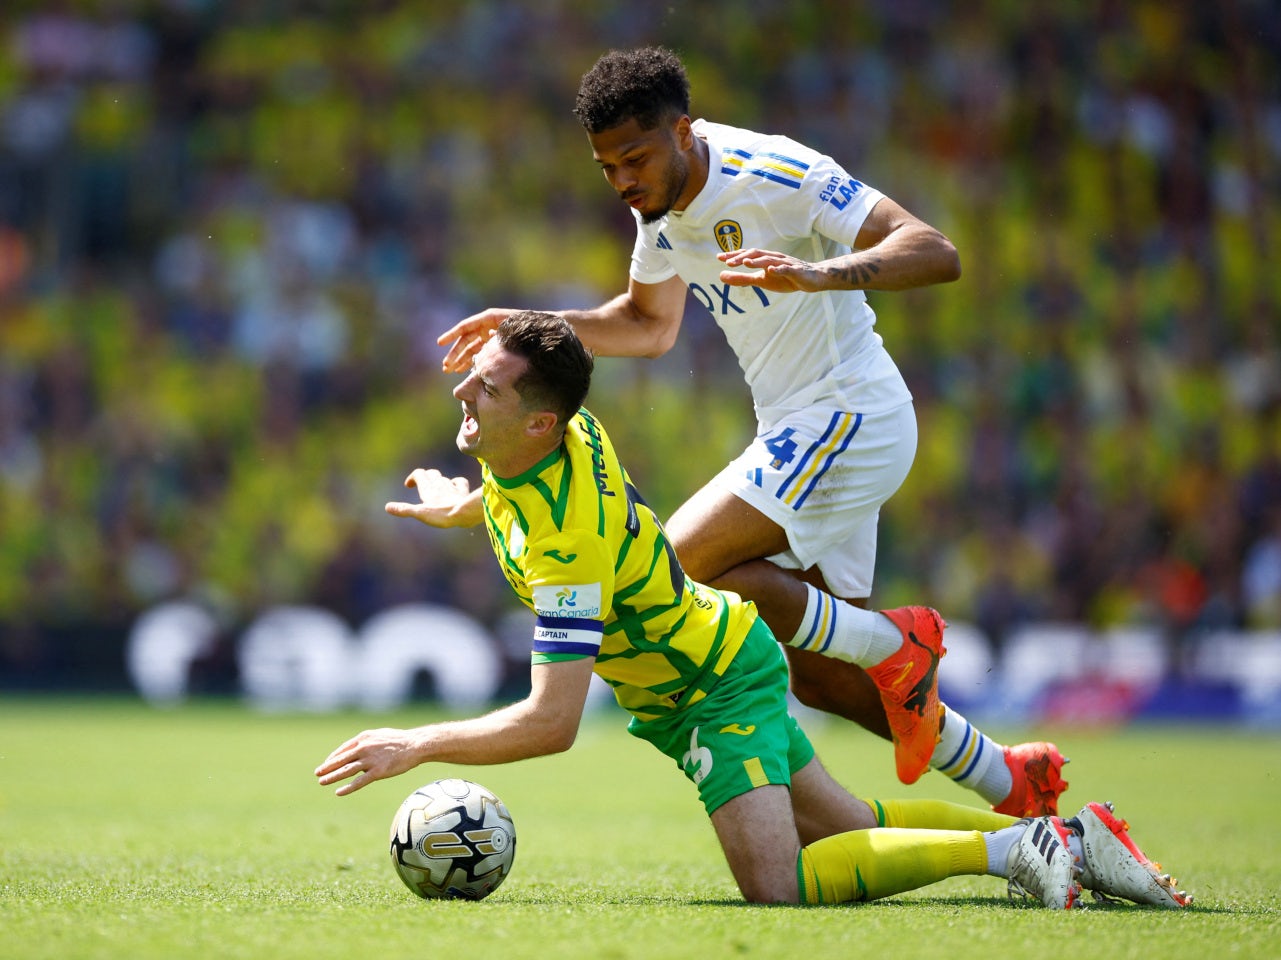 Preview: Leeds United vs. Norwich City - prediction, team news, lineups